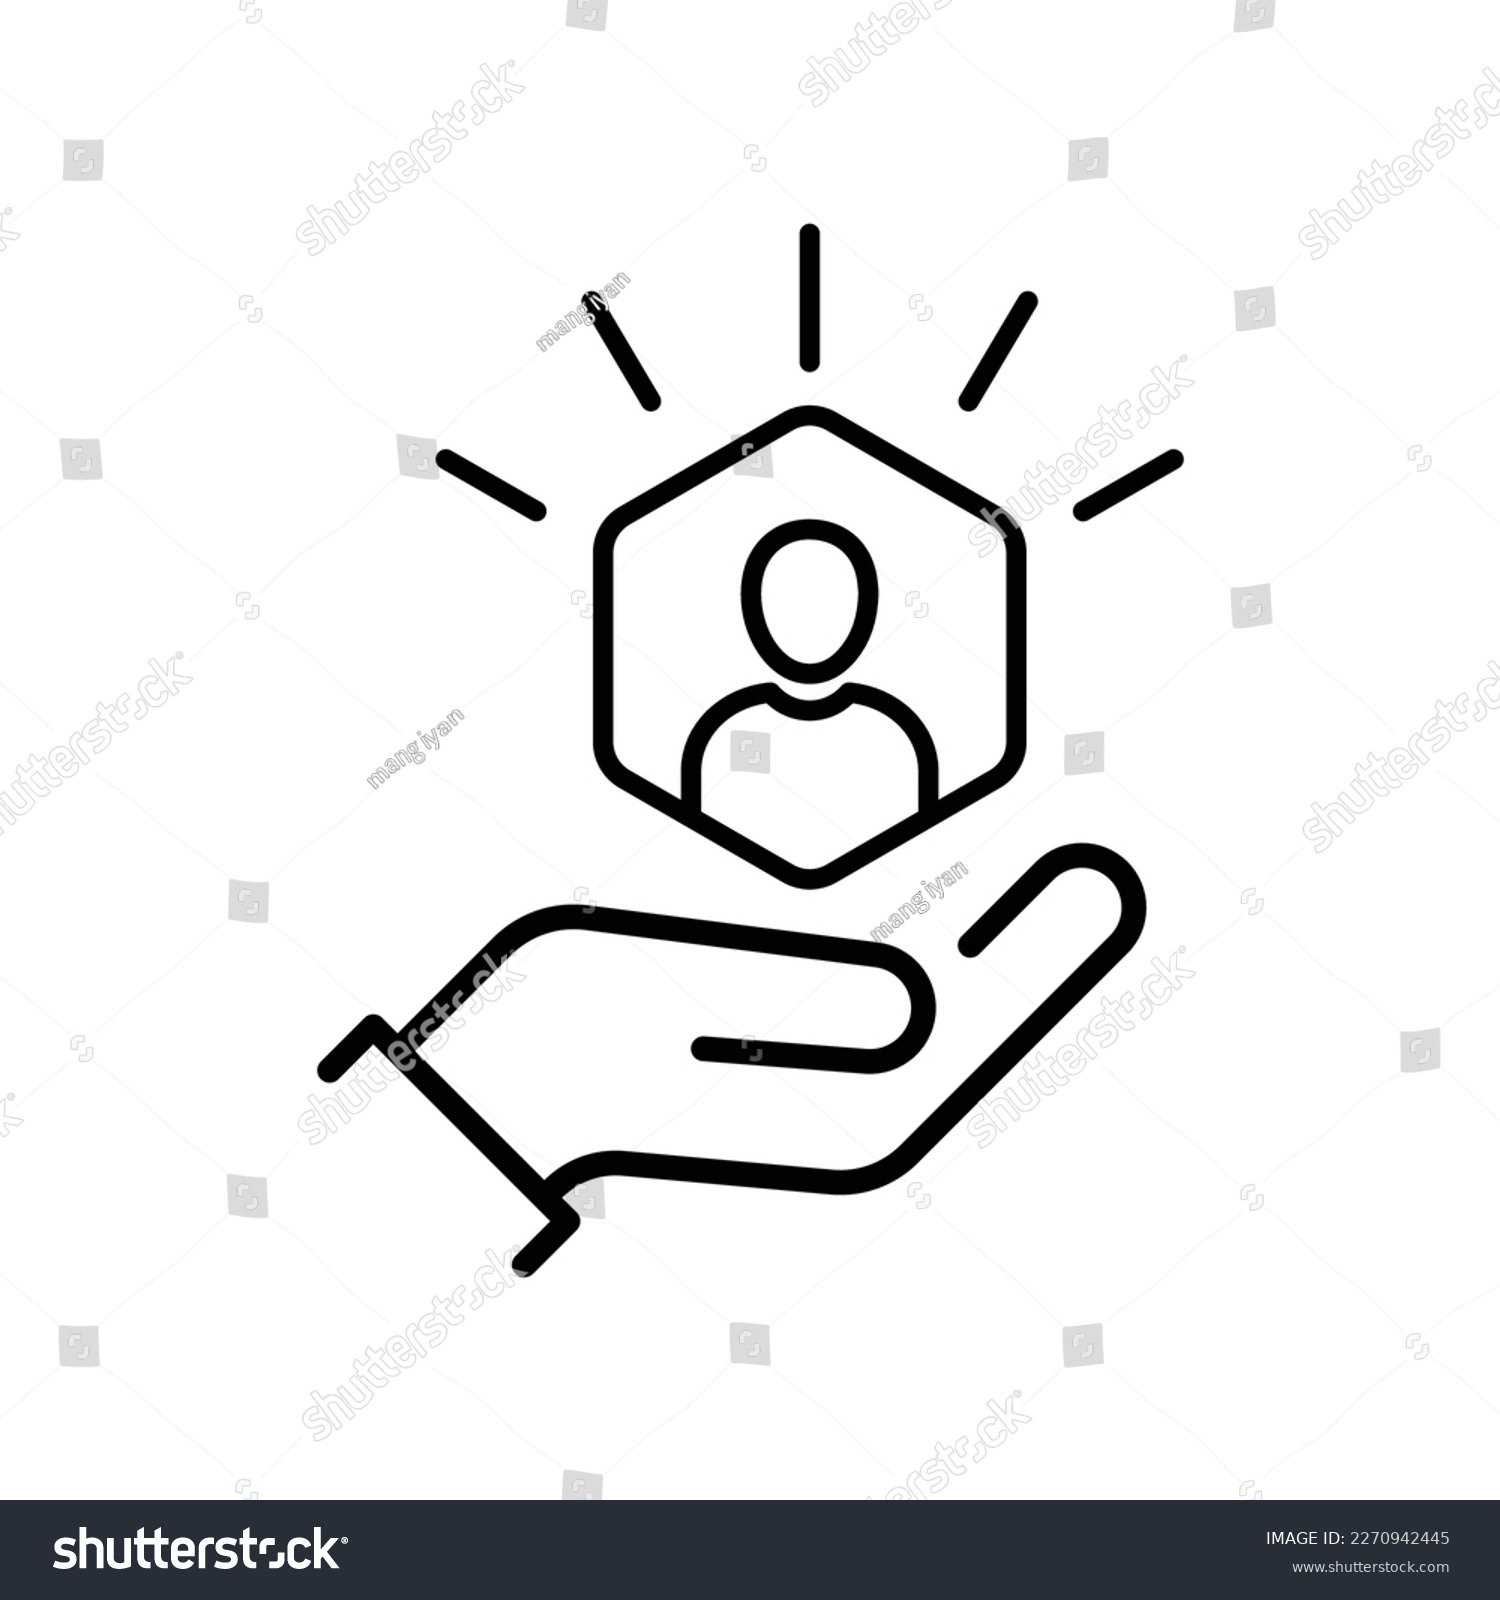 SVG of customer care icon with thin line hands. simple linear trend human resource logotype graphic stroke design. concept of individual people choice or good feedback and narrow control or search talent svg